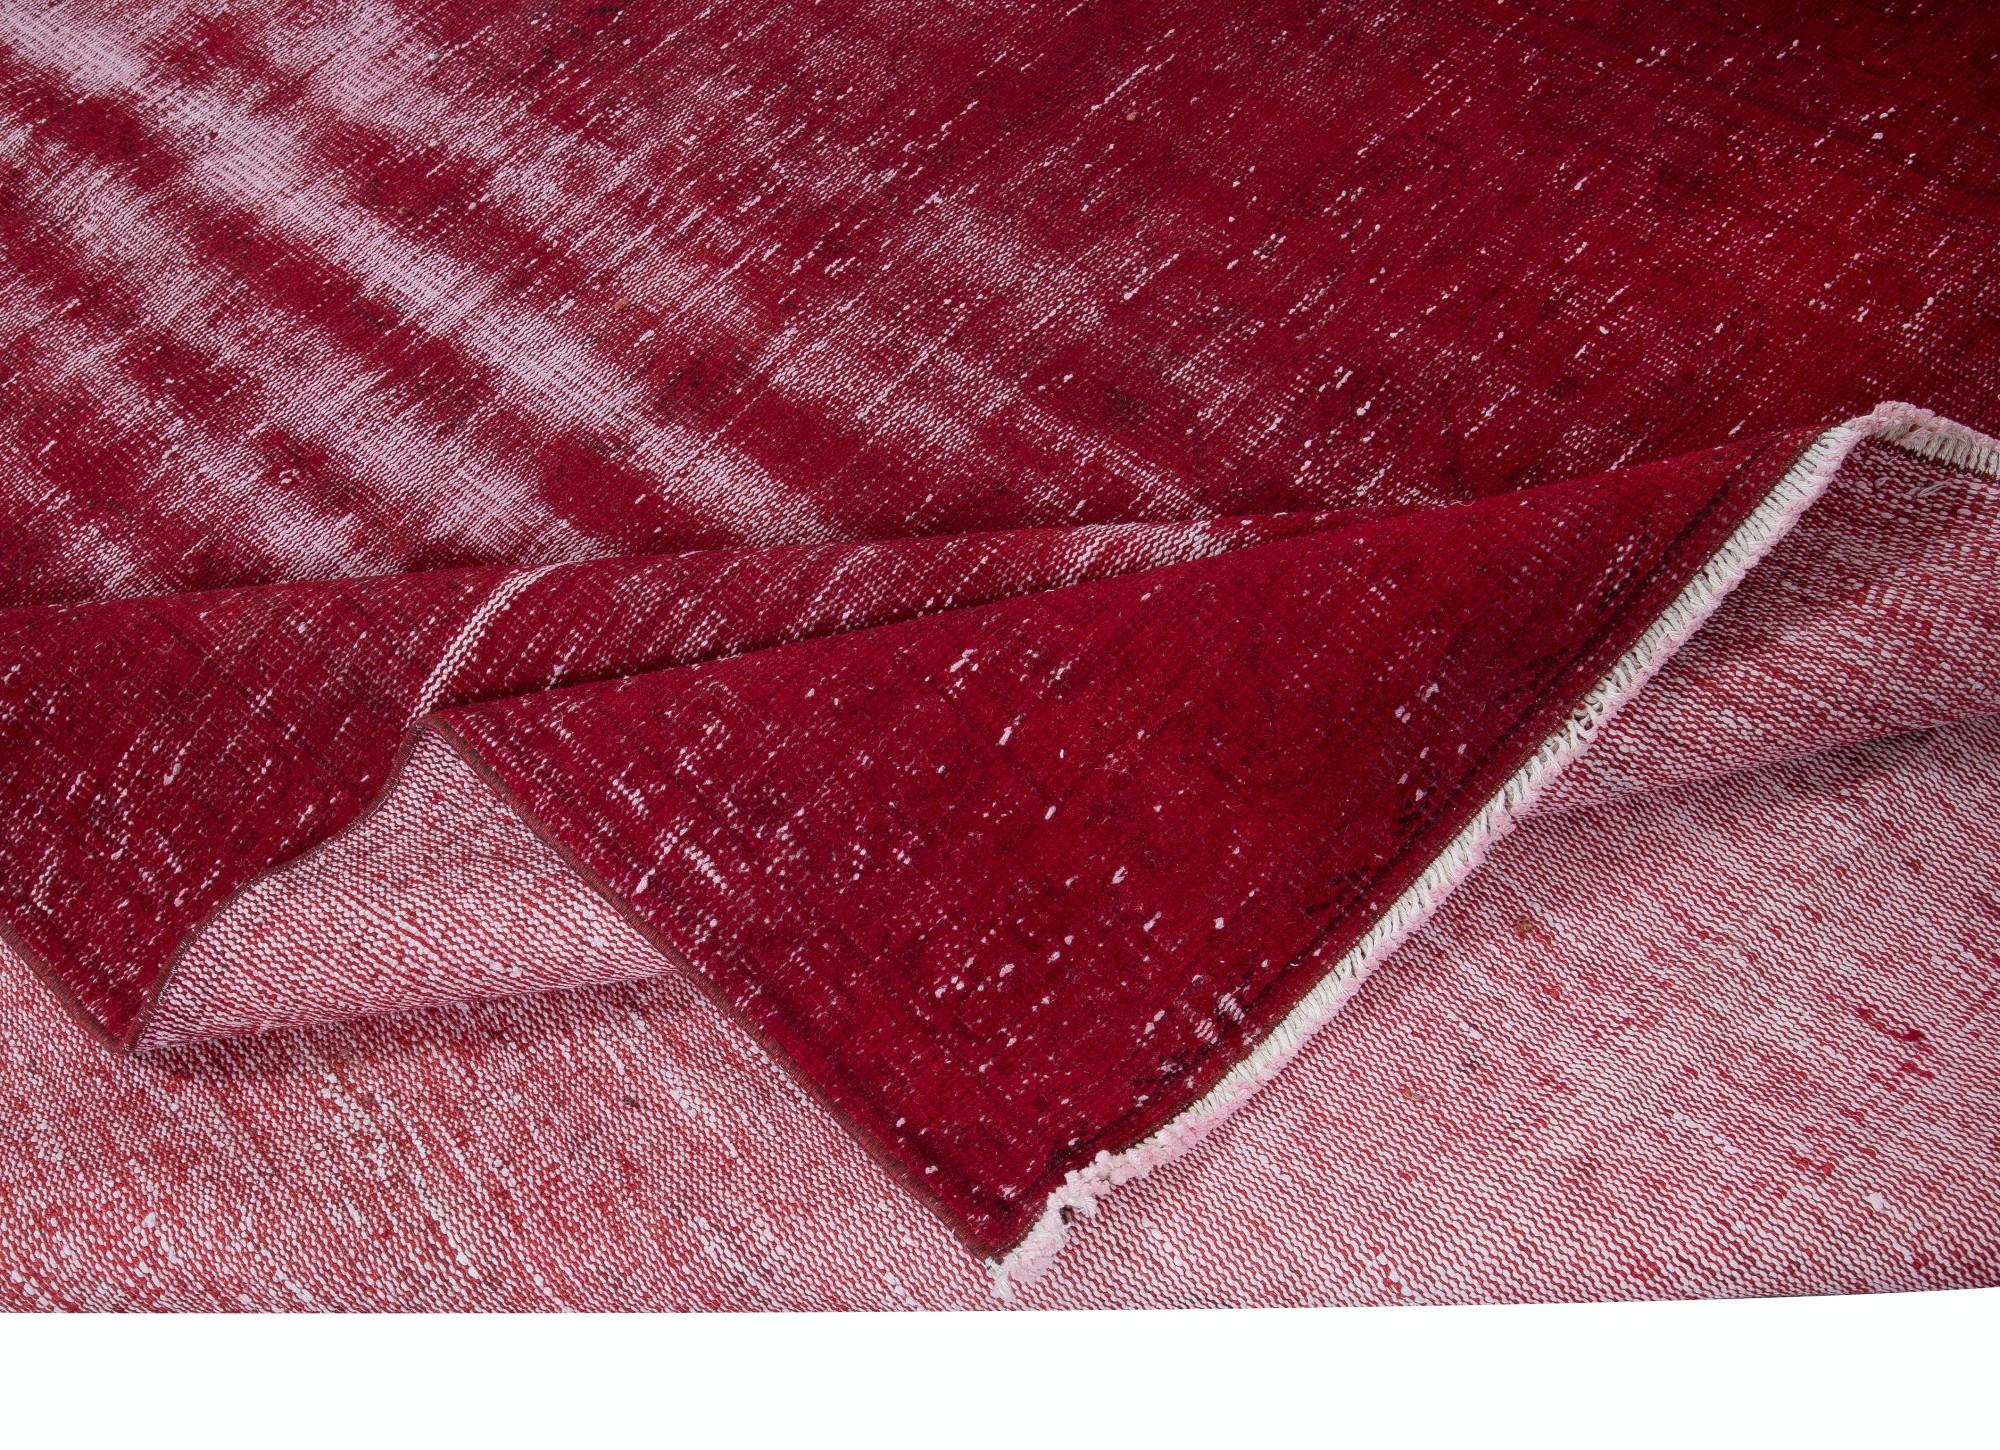 Hand-Woven 6x9.2 Ft Shabby Chic Modern Turkish Wool Red Rug, Handmade Distressed Old Carpet For Sale